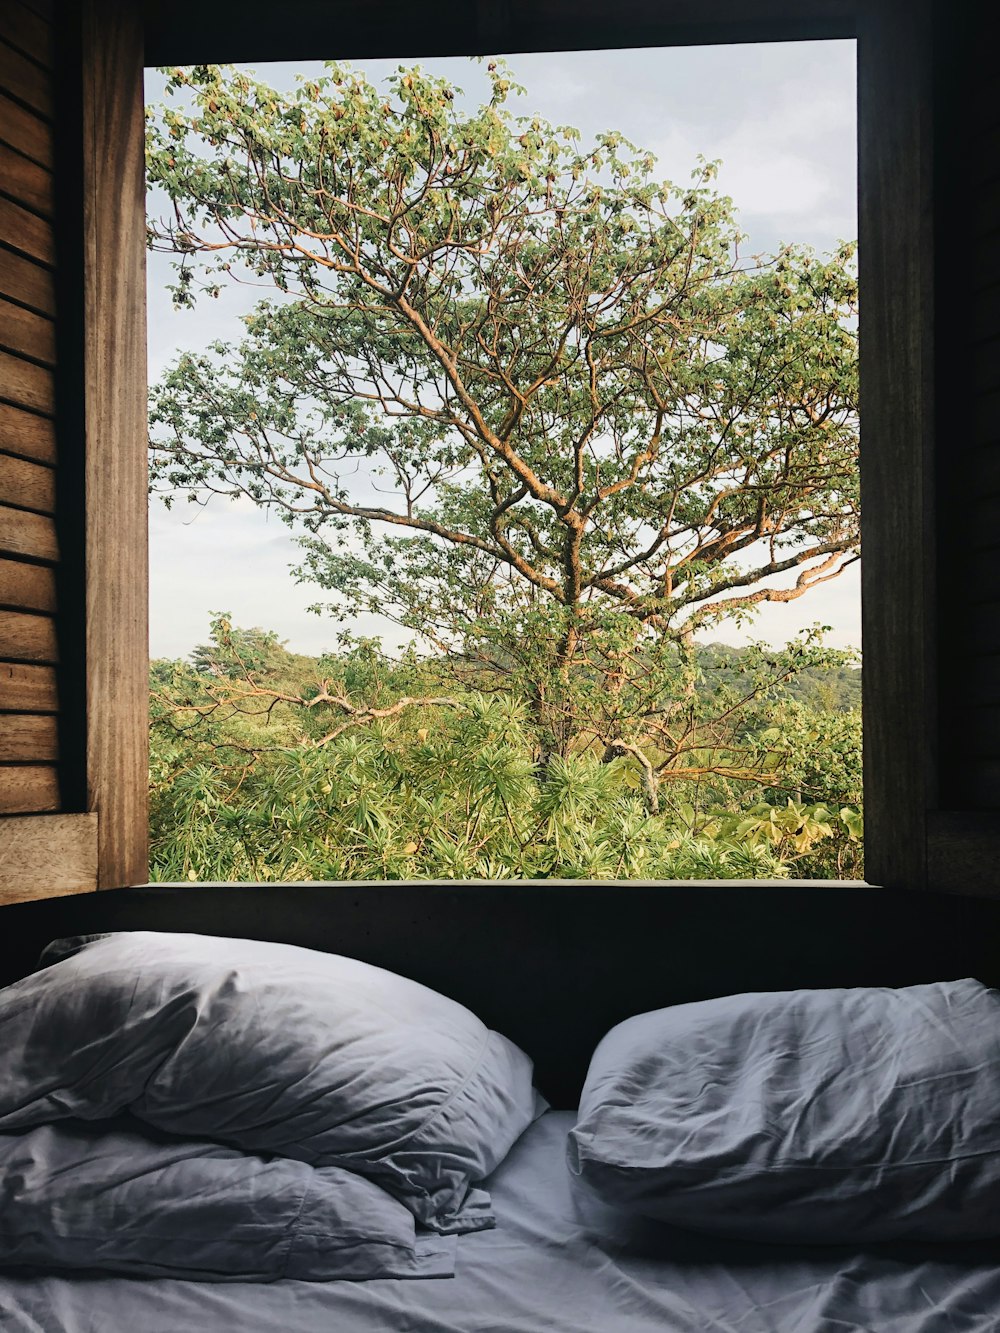 view of a green-leafed tree from an open window